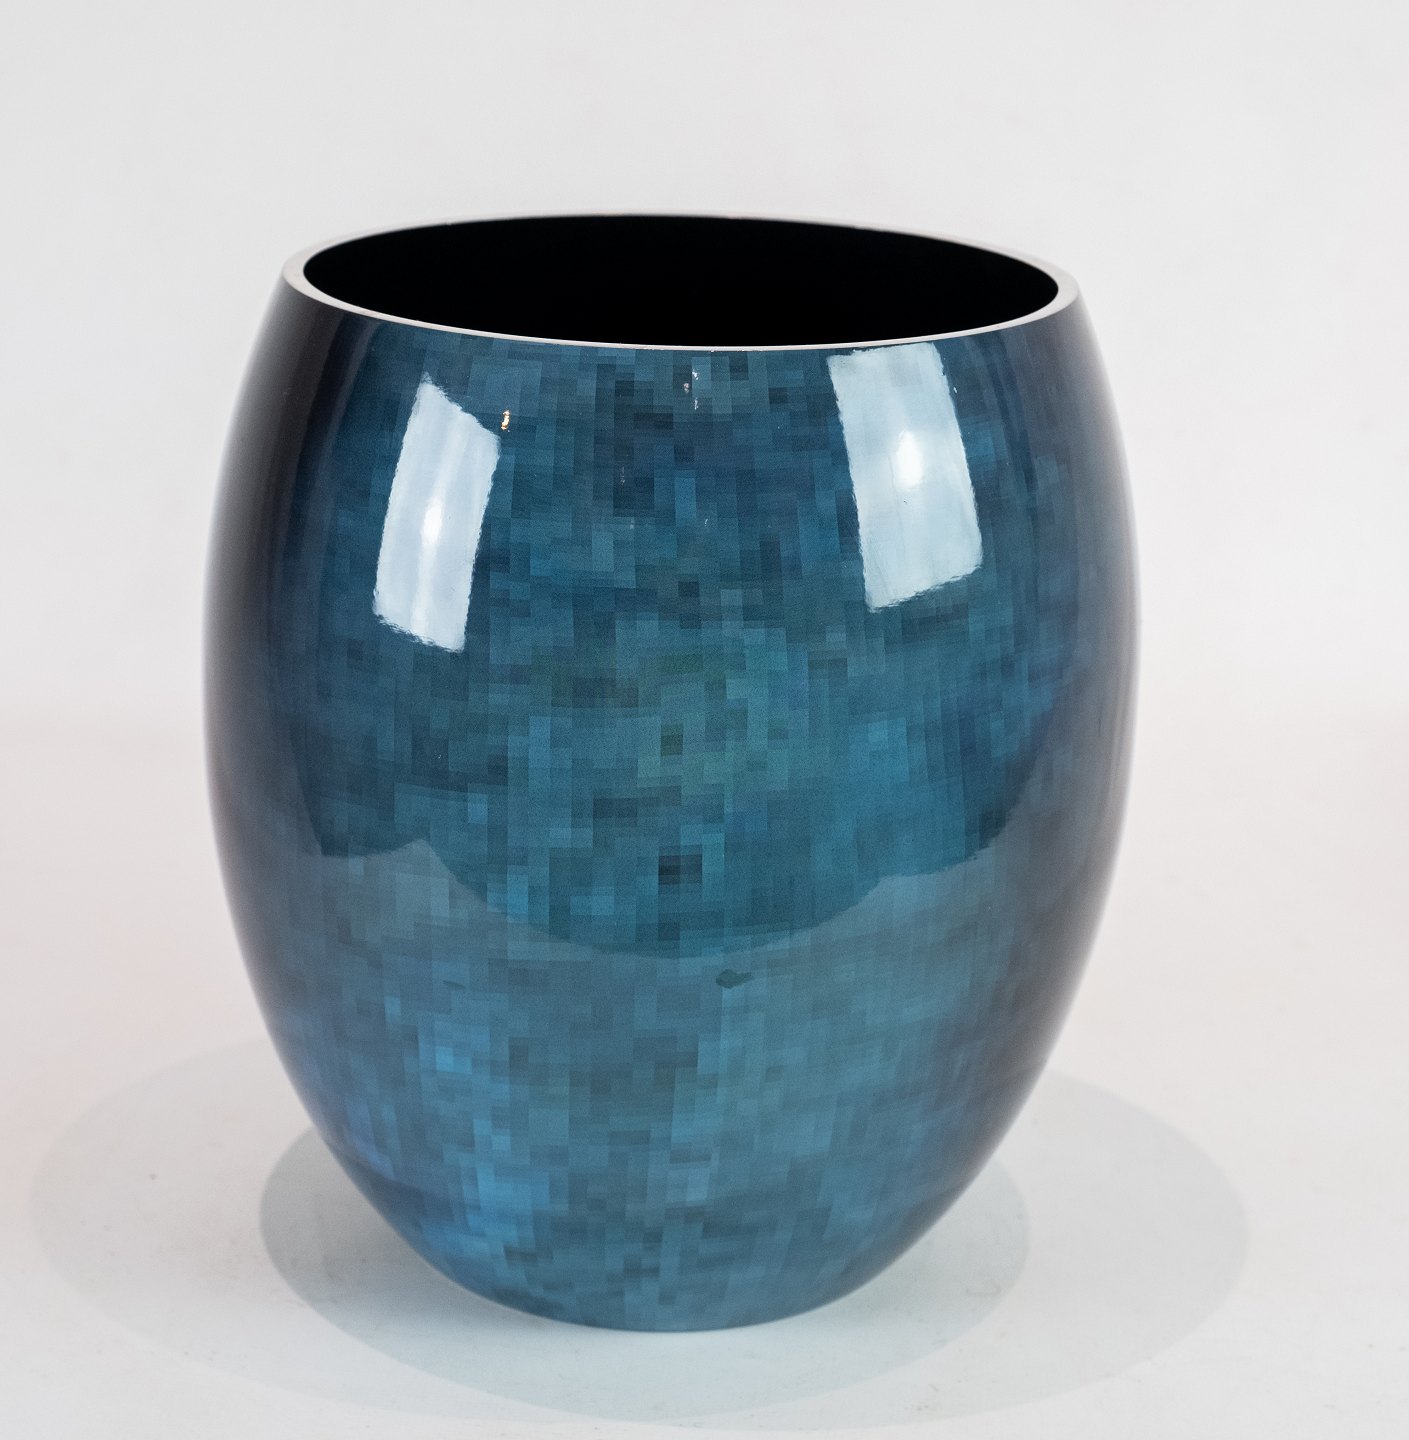 Stockholm Horizon vase with blue color and stainless steel by * 5000 - Antik & Design